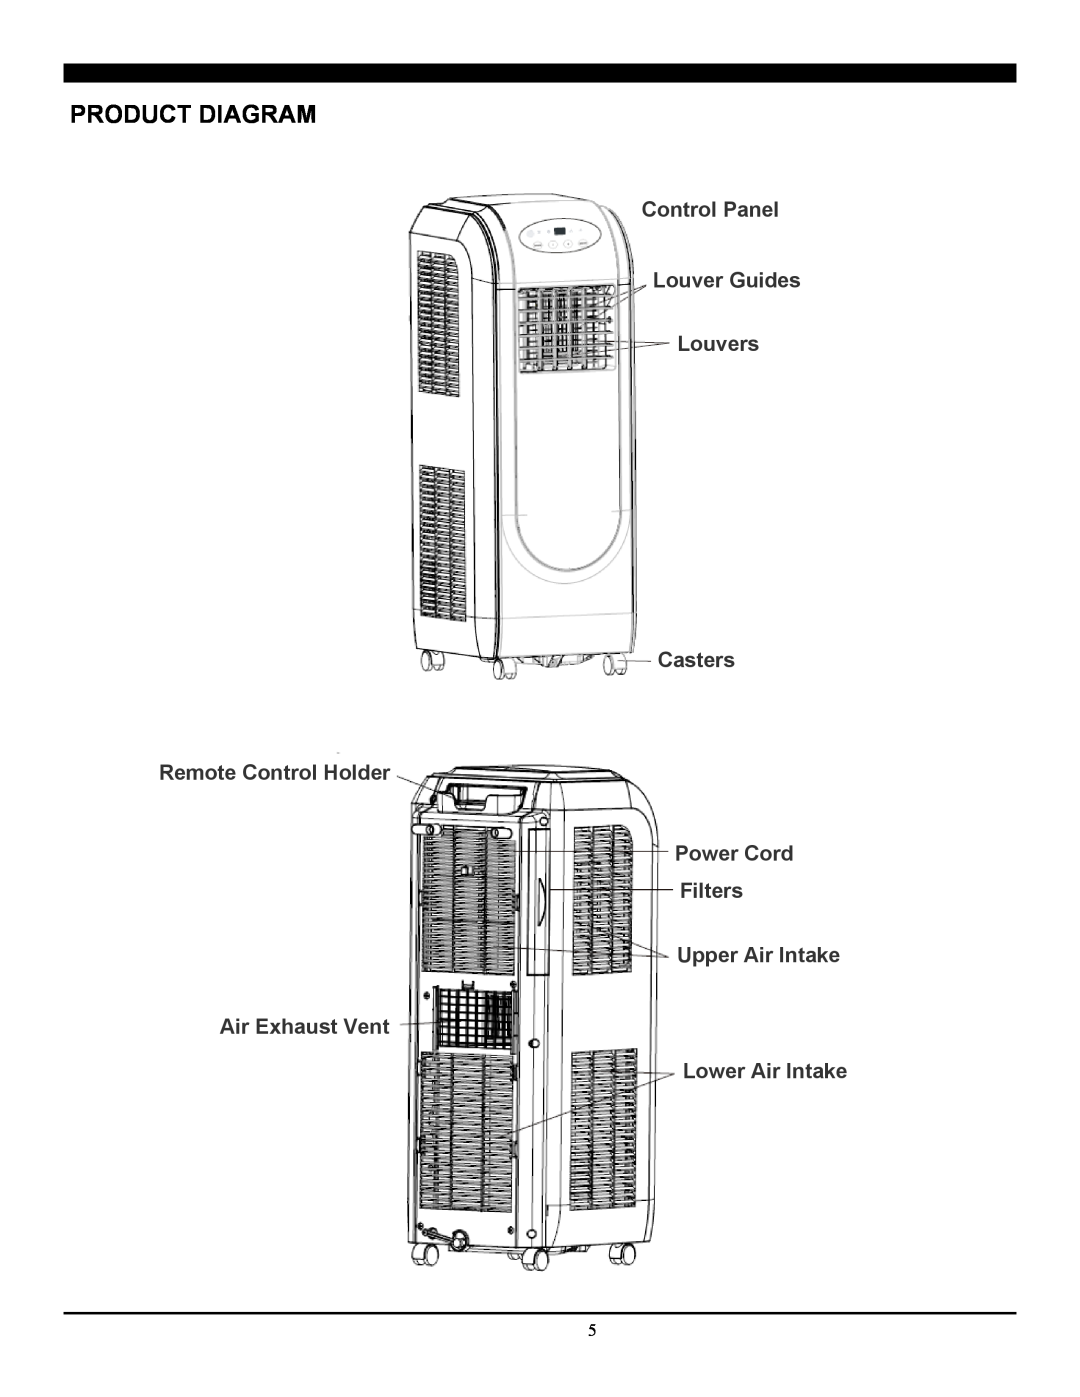 Soleus Air SG-PAC-10E5 Product Diagram, Control Panel Louver Guides Louvers Casters, Upper Air Intake Air Exhaust Vent 